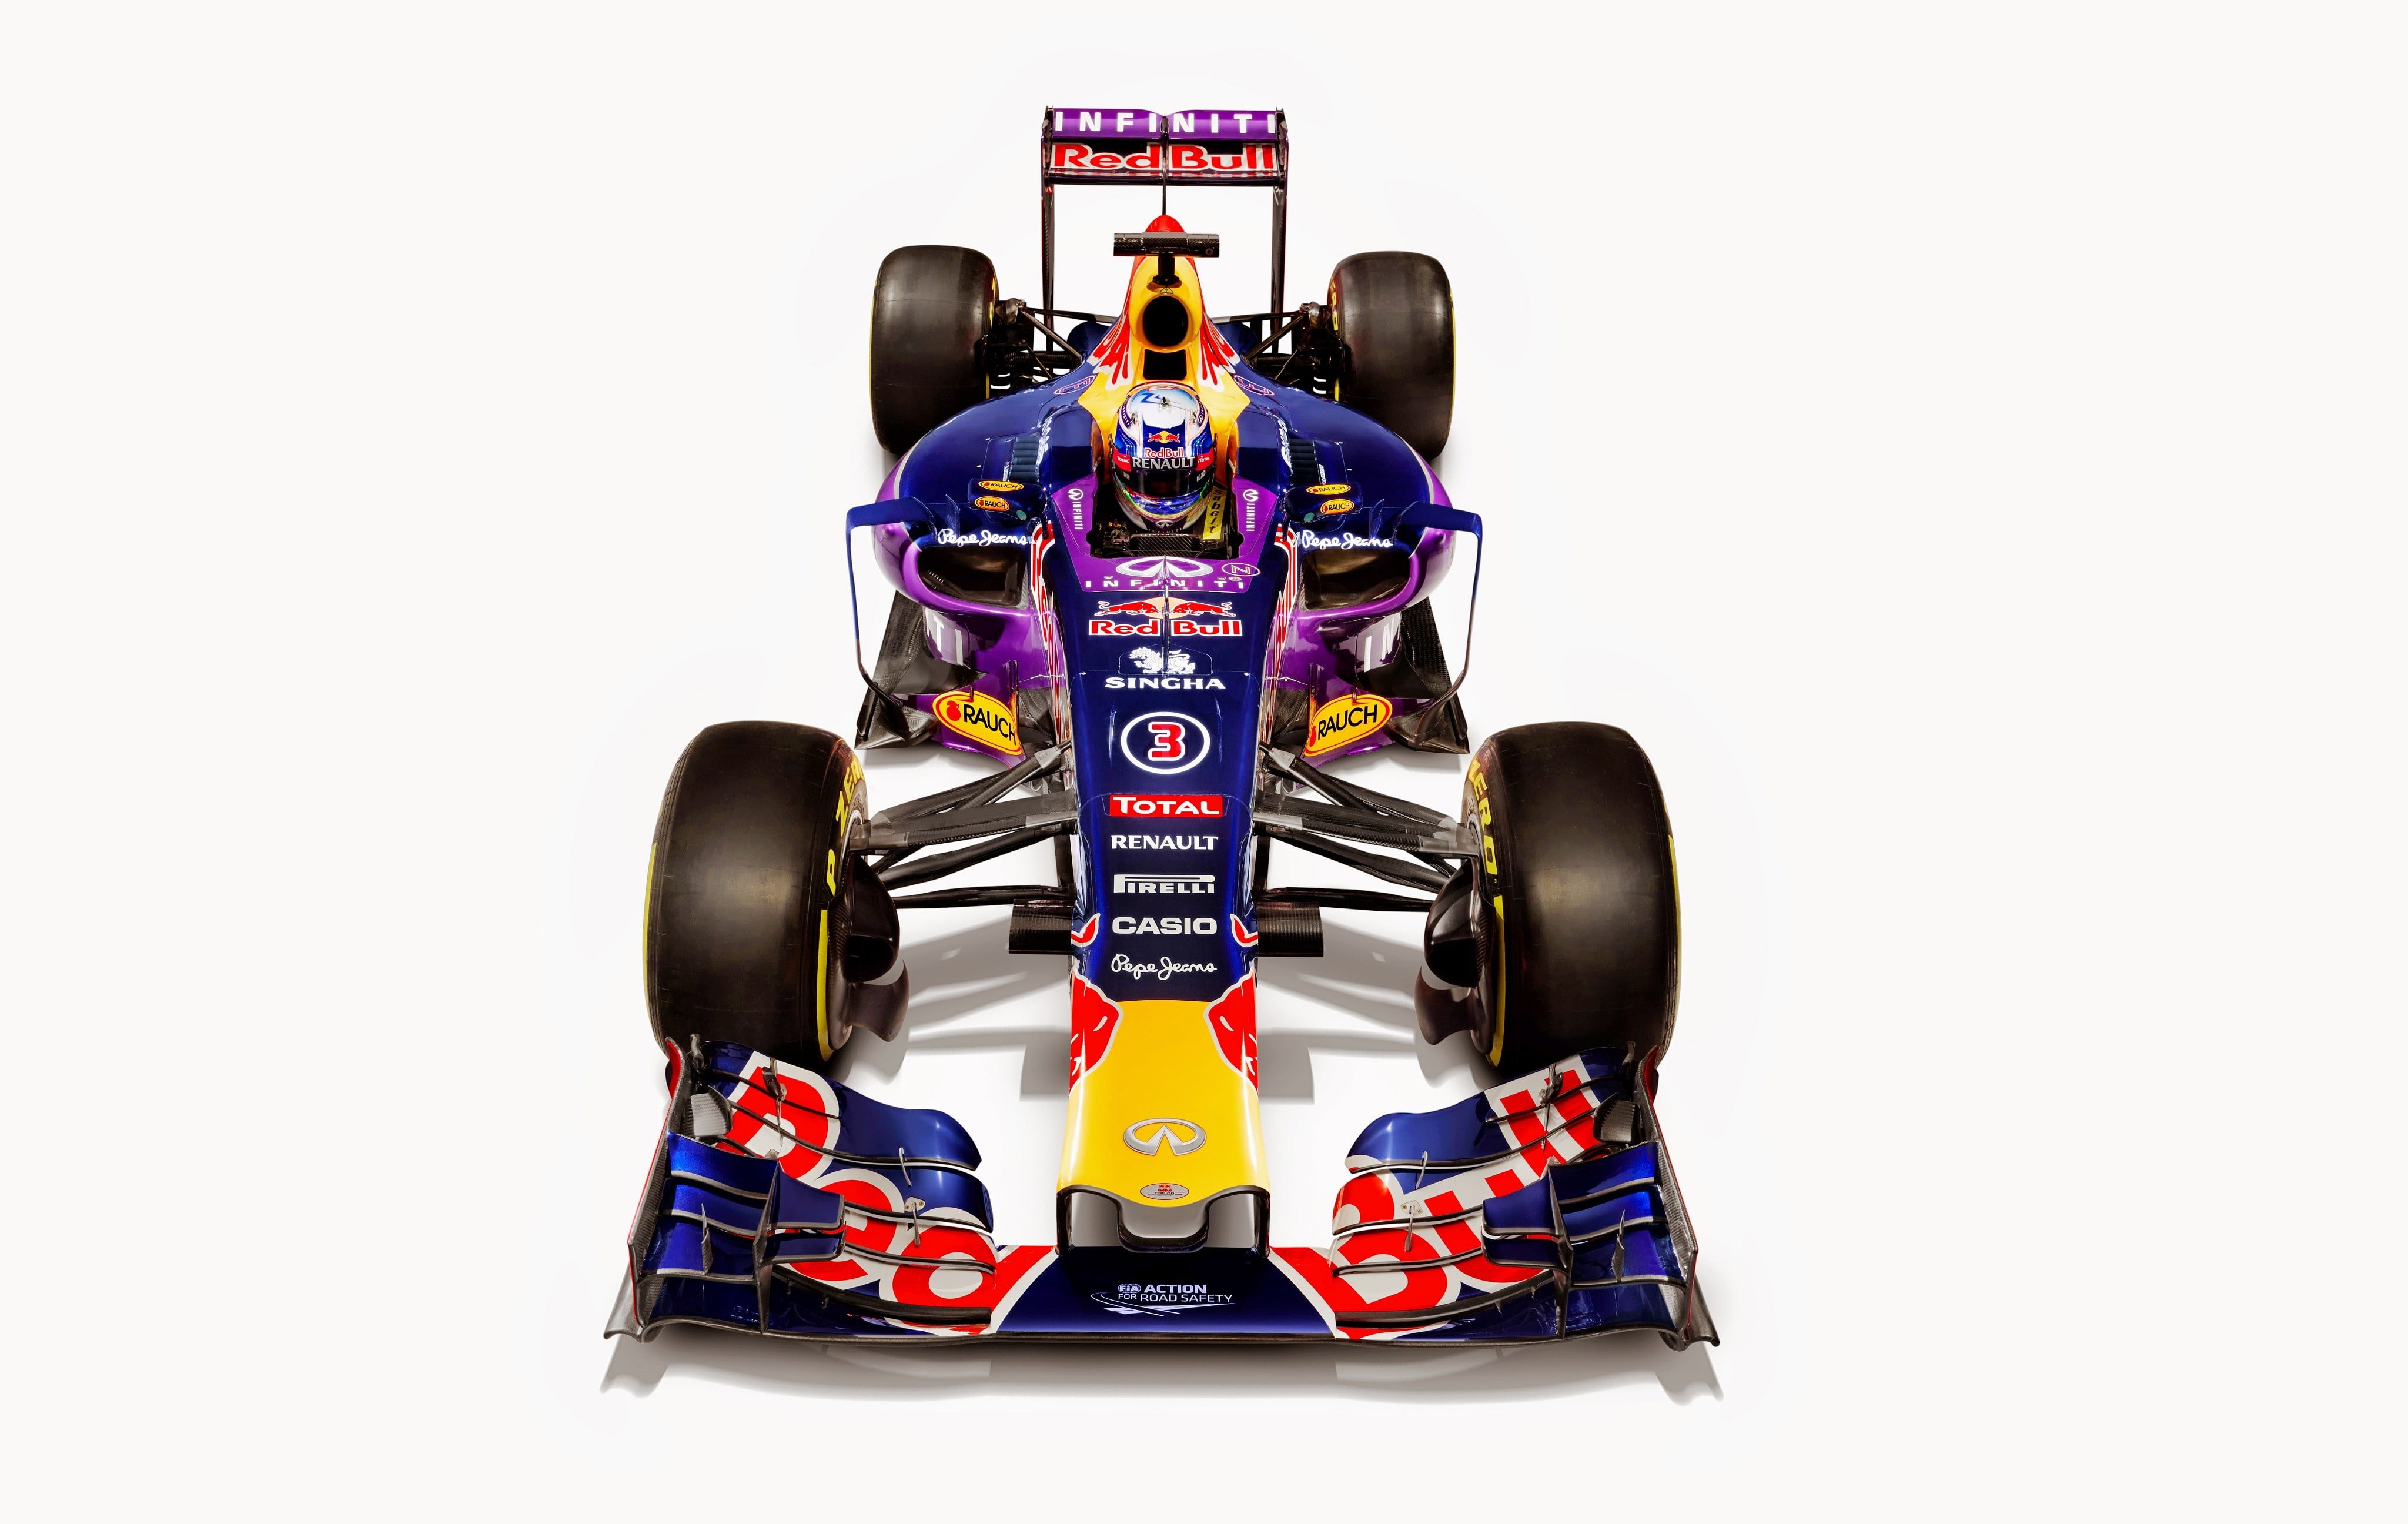 Blue Red Bull F1 Racing Car Illustration With White Background Hd